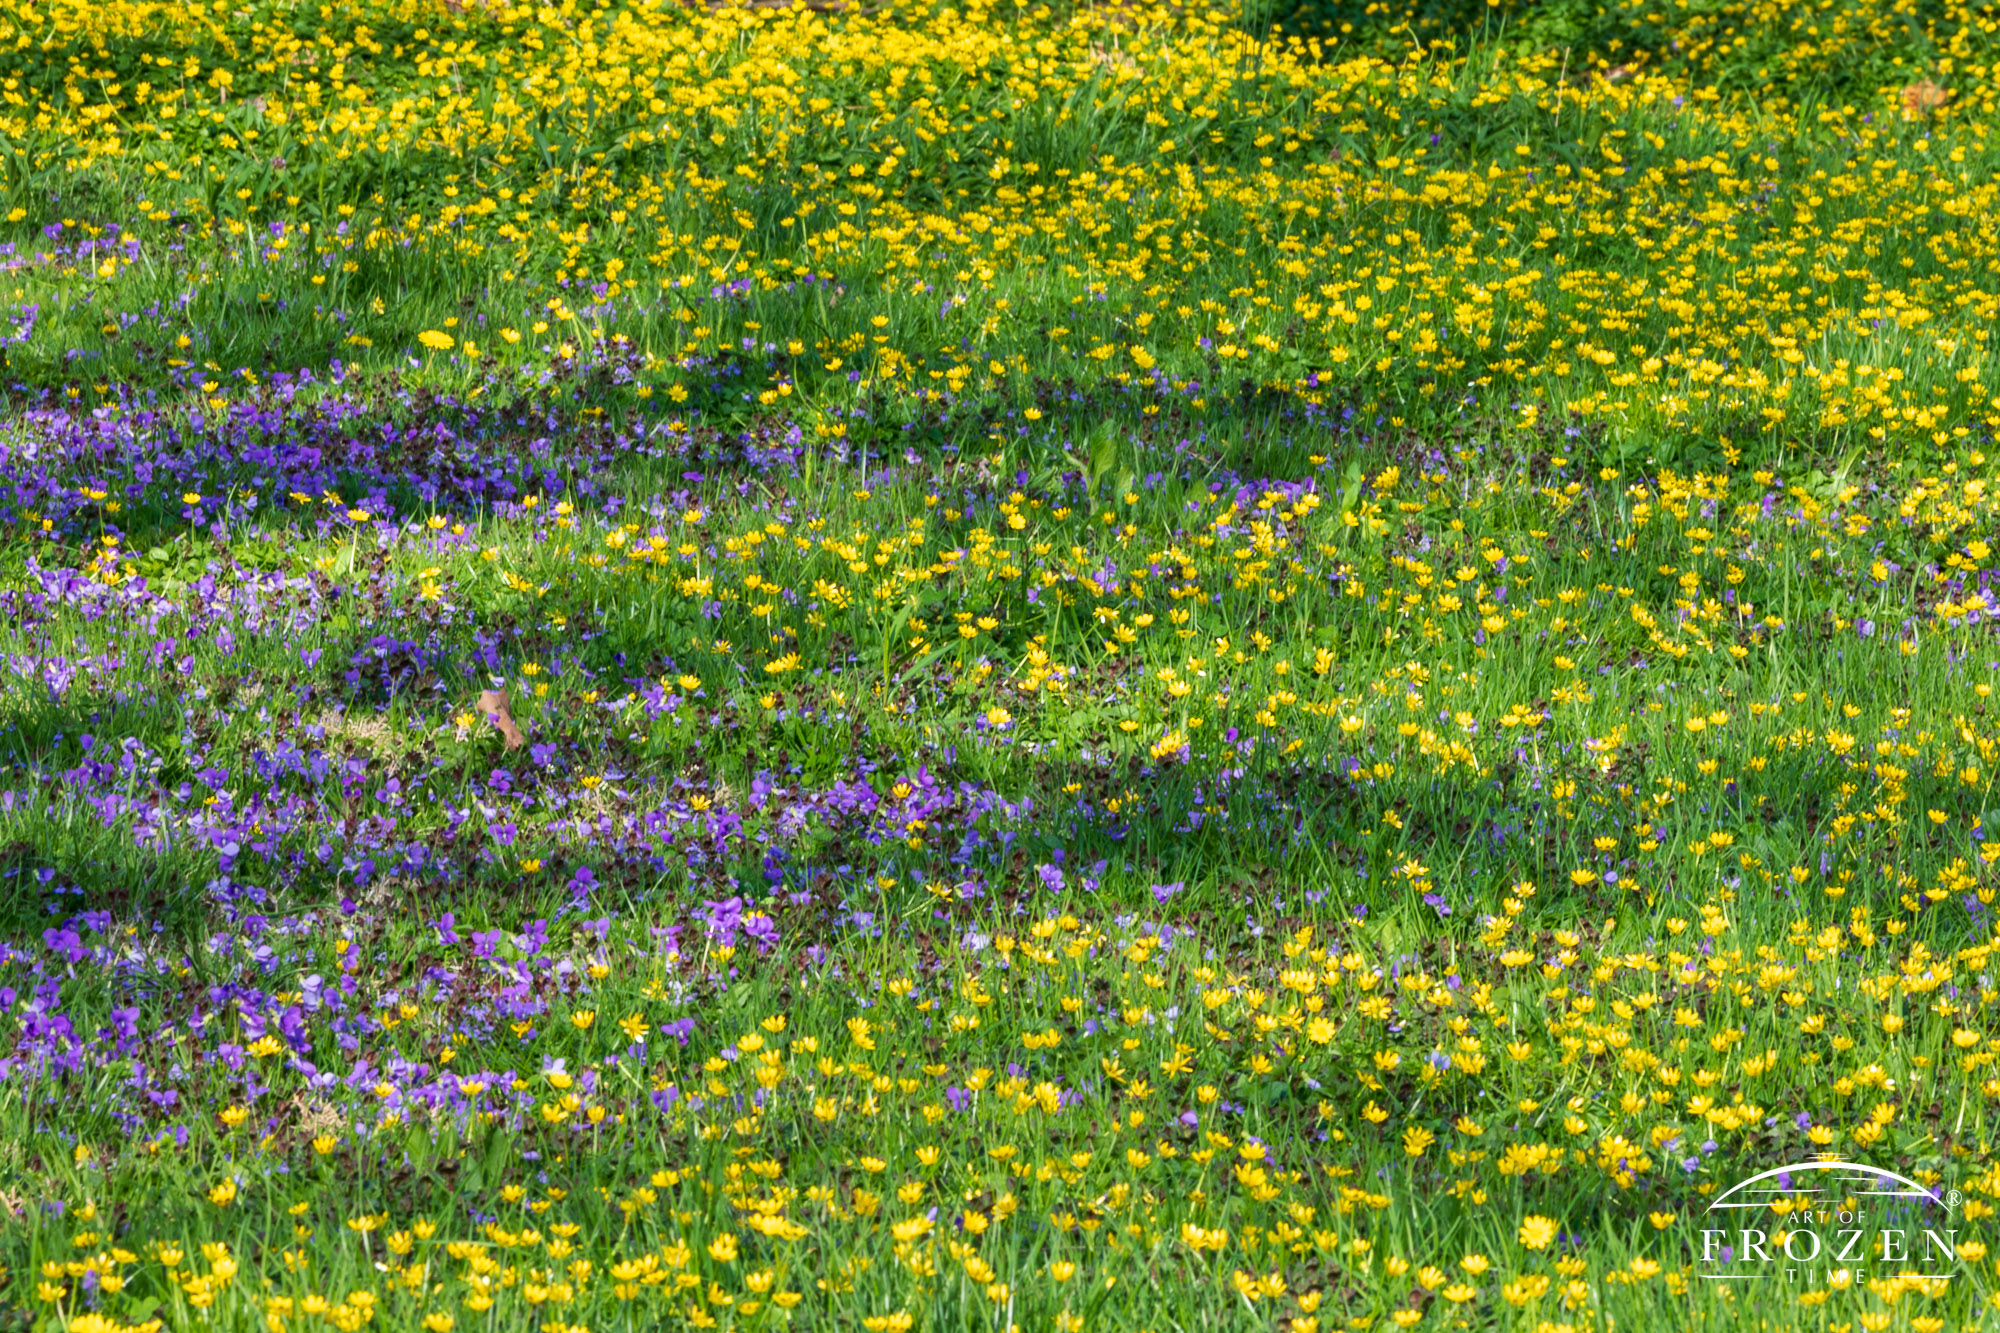 Patches of common blue violet lies with a forest floor of yellow buttercup flowers which basket in warm light